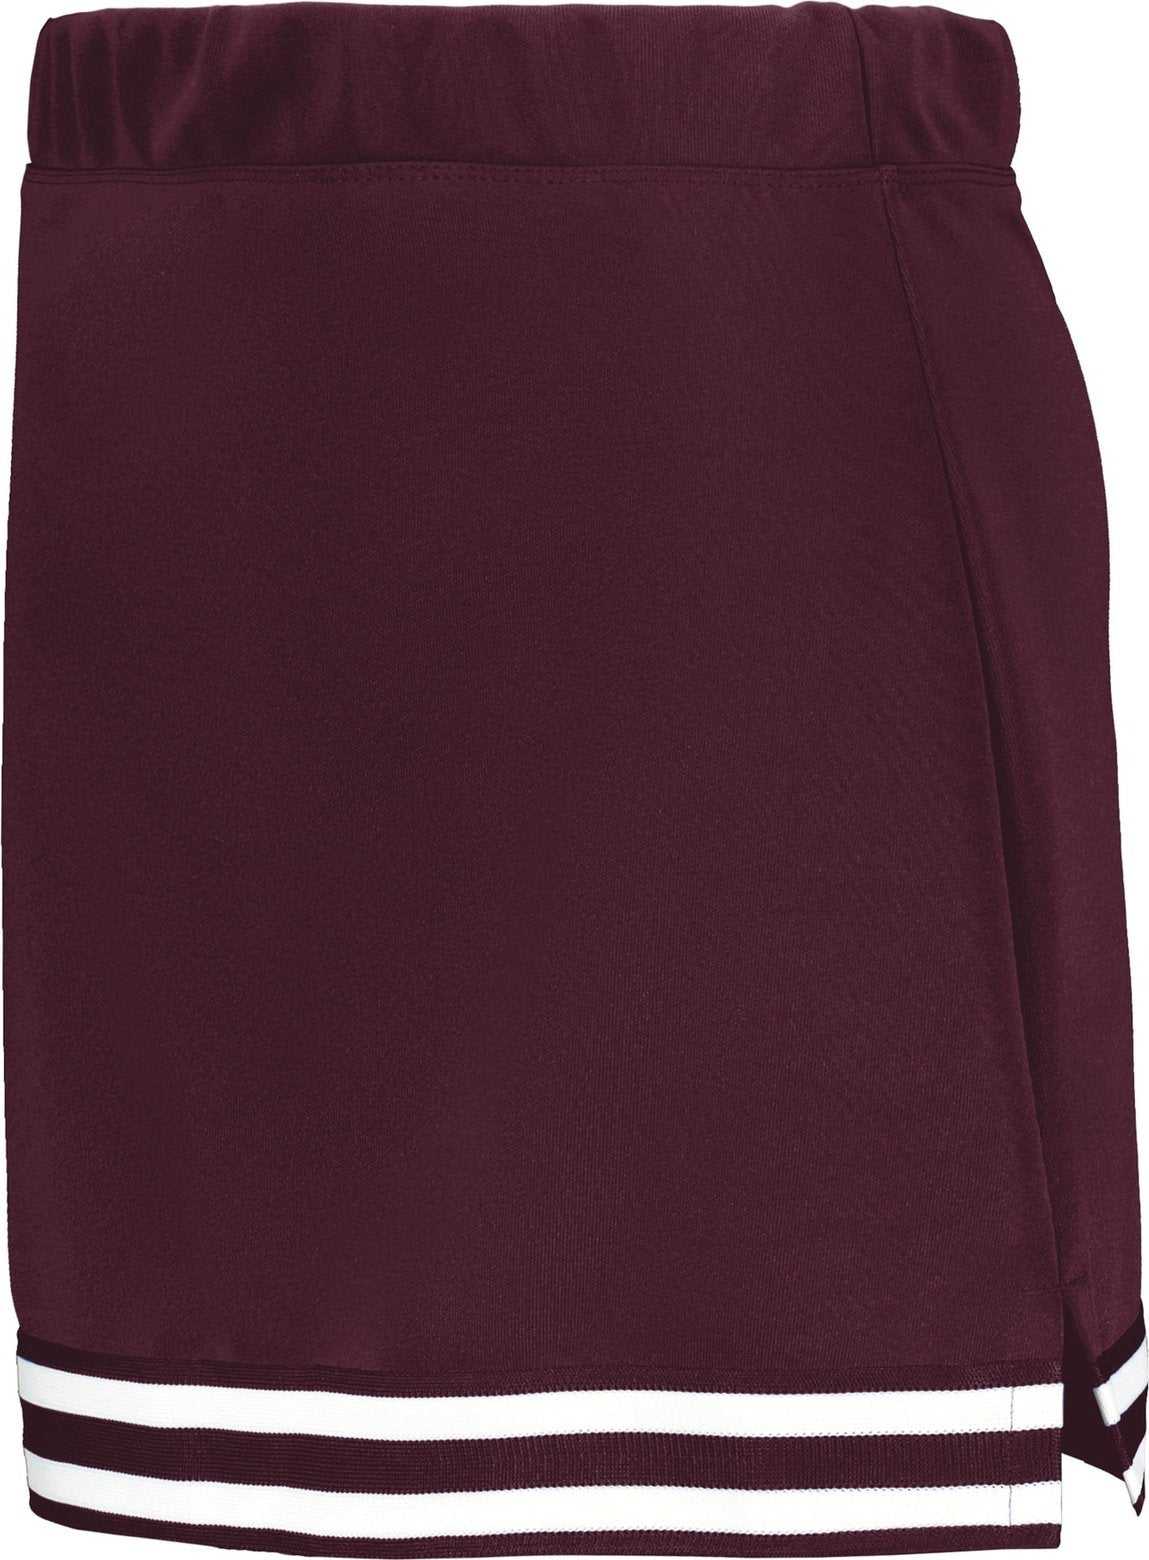 Augusta 6925 Ladies Cheer Squad Skirt - Maroon Black White - HIT a Double